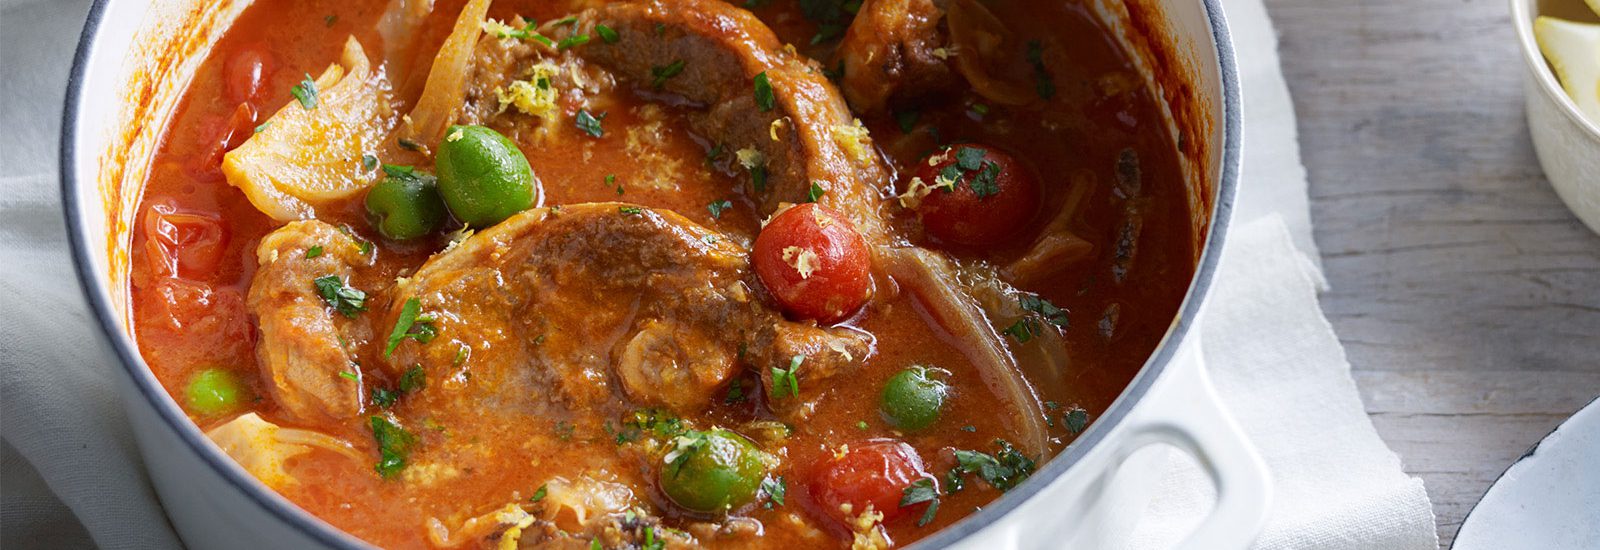 Lamb Casserole with Green Olives